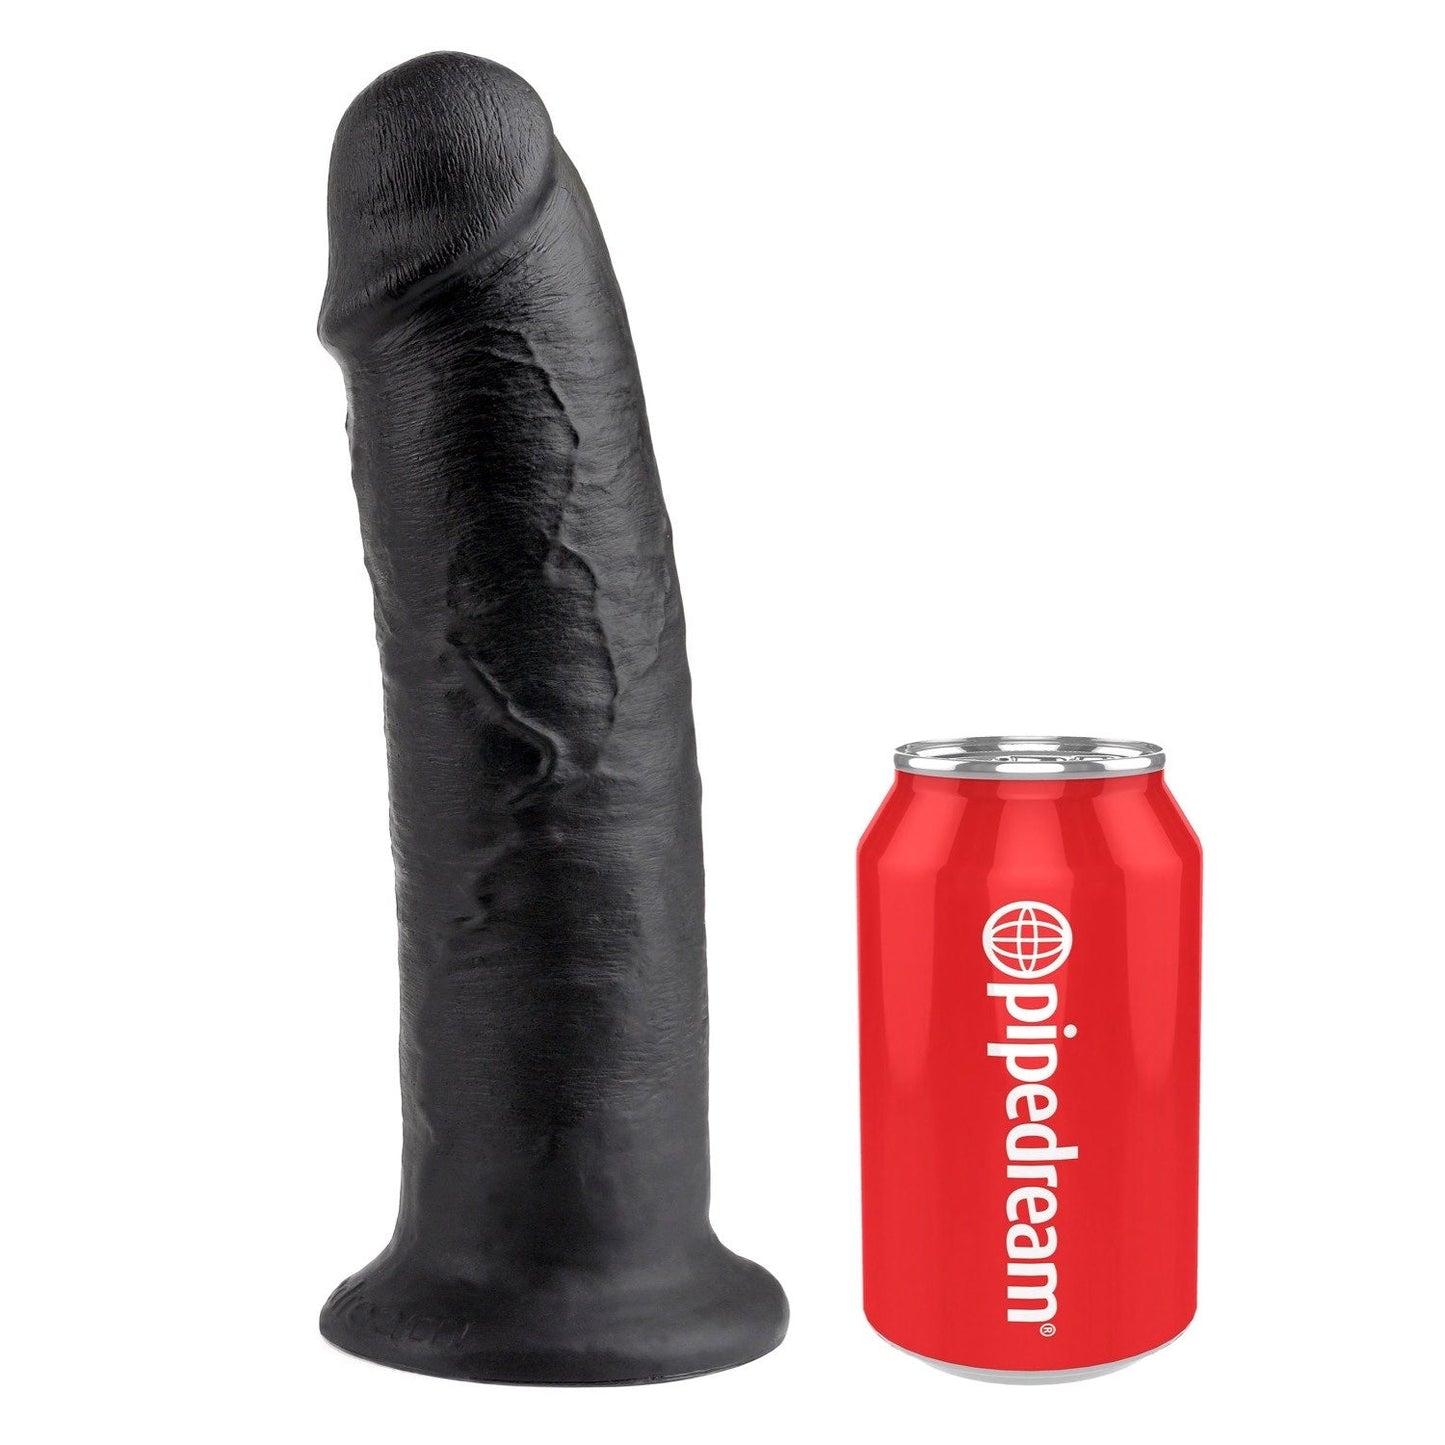 10" Cock - Black 25.4 cm (10") Dong